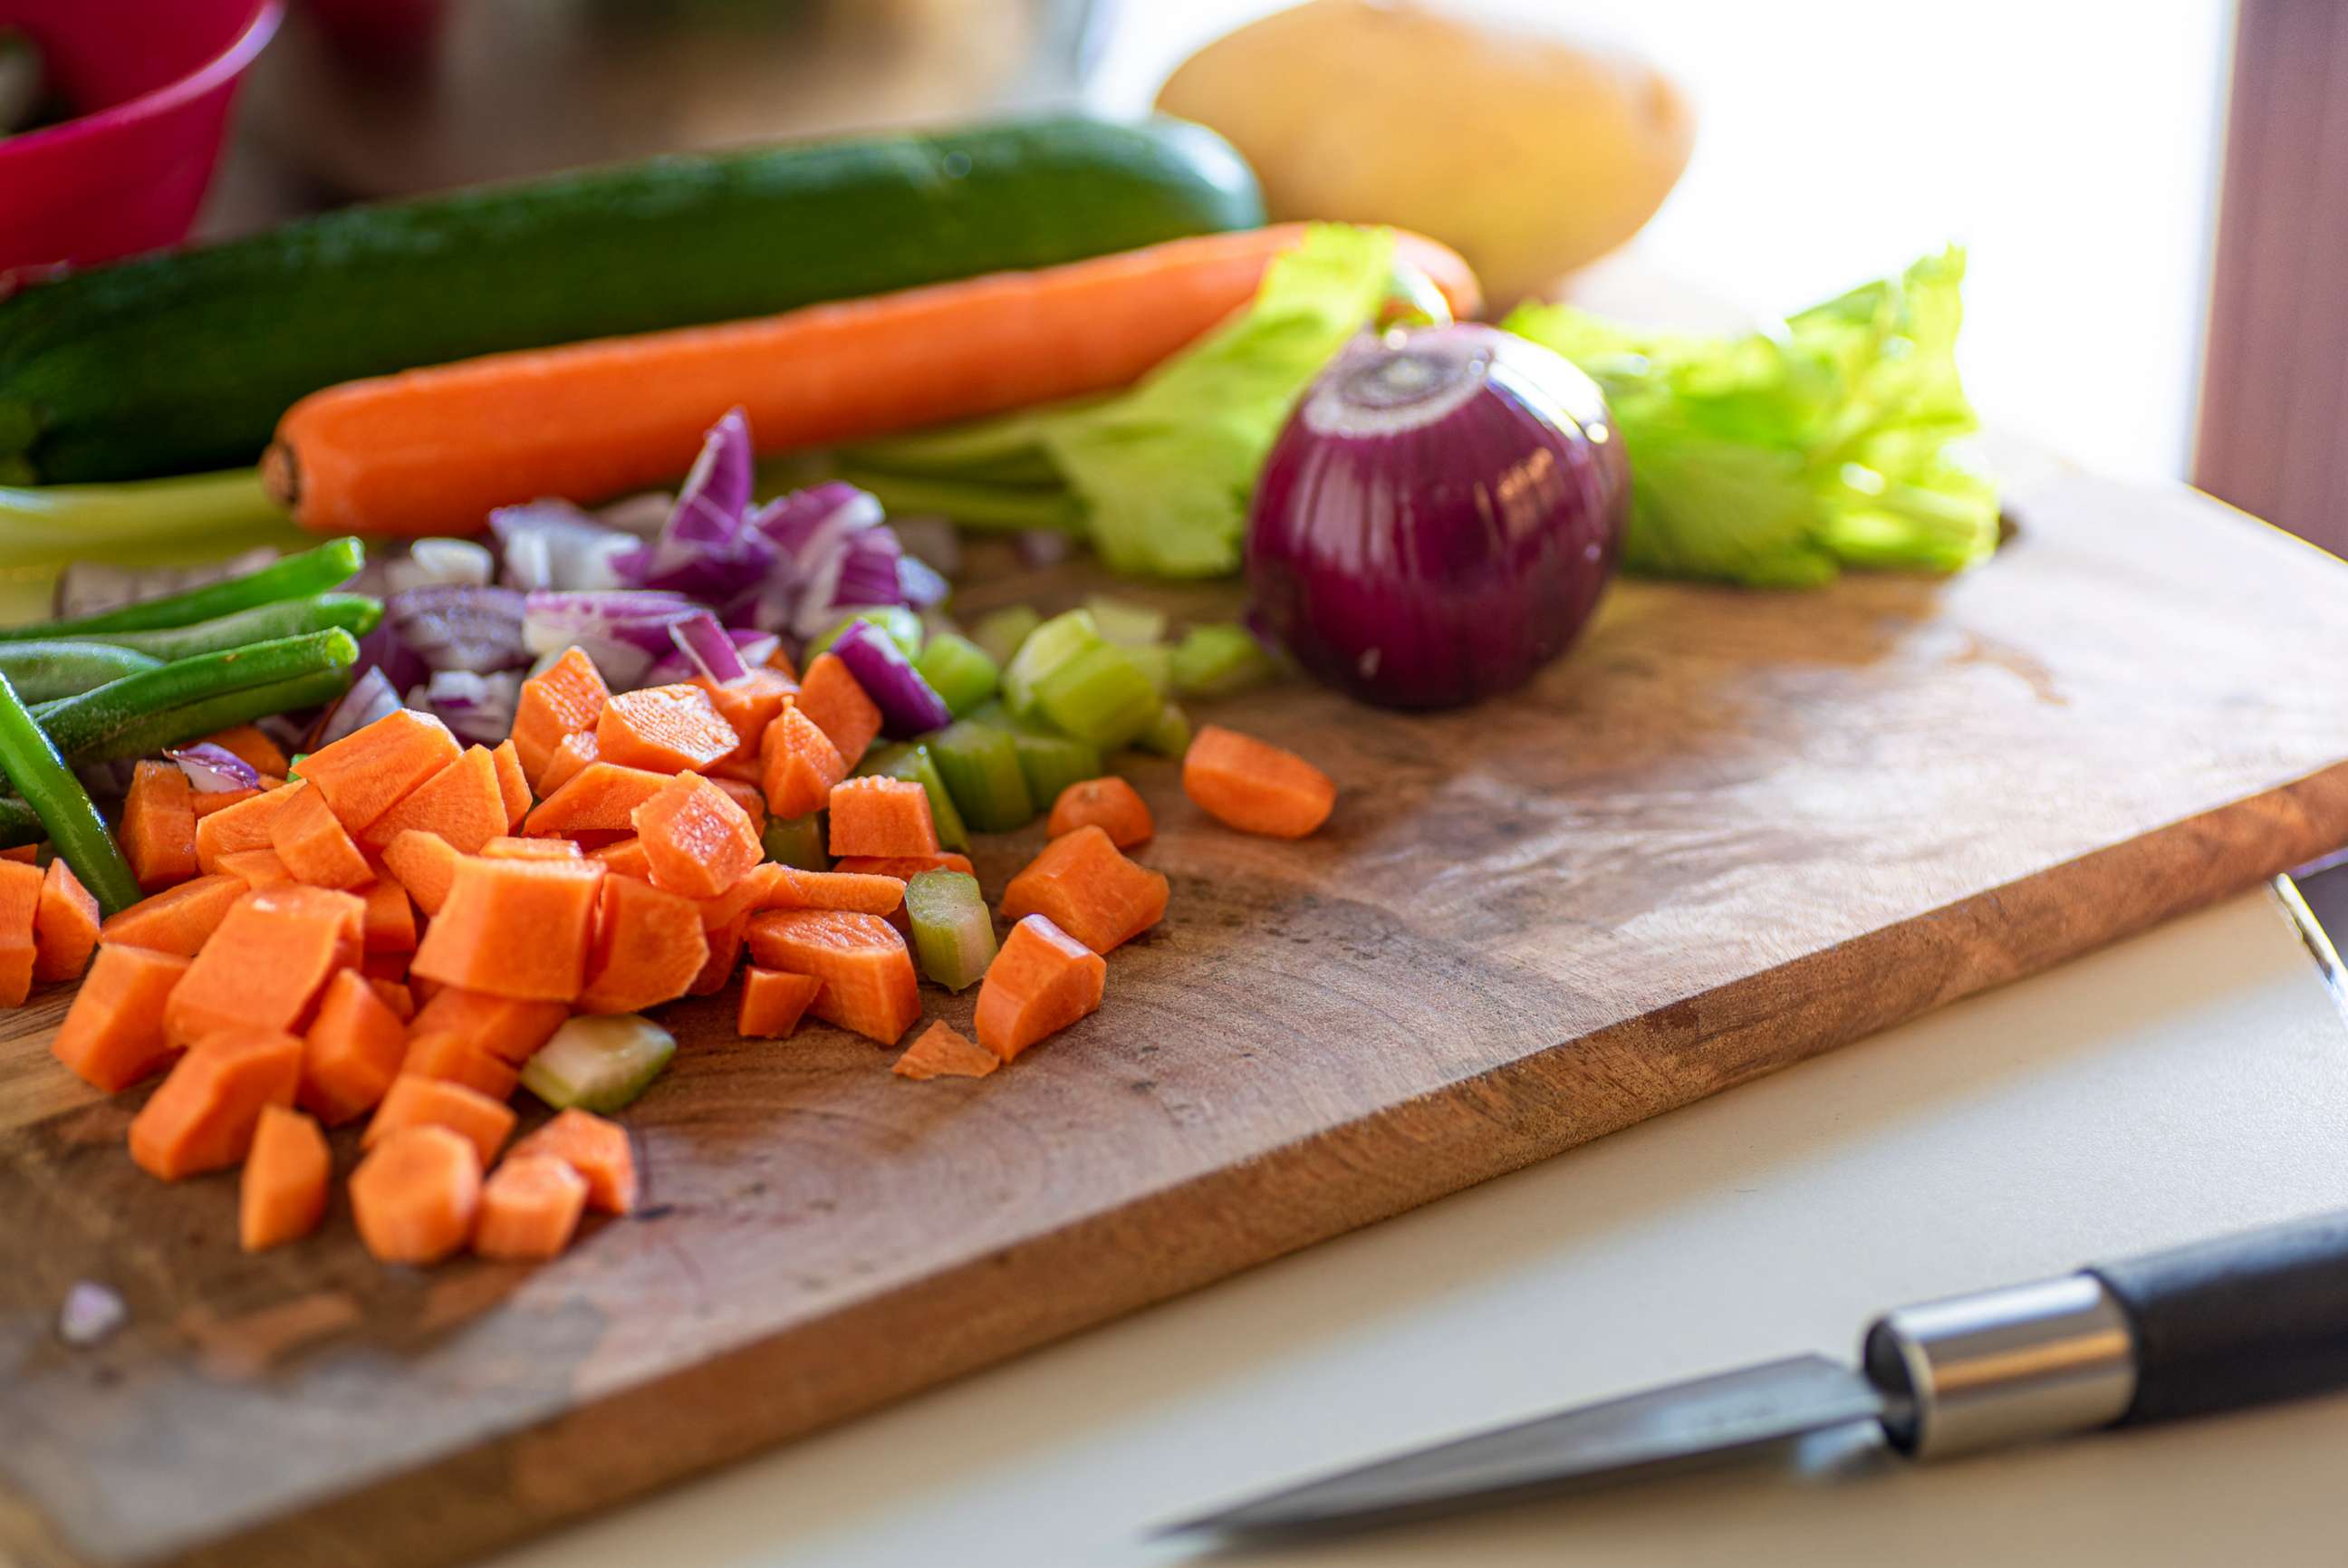 PHOTO: In this undated file photo, vegetables are shown on a cutting board.